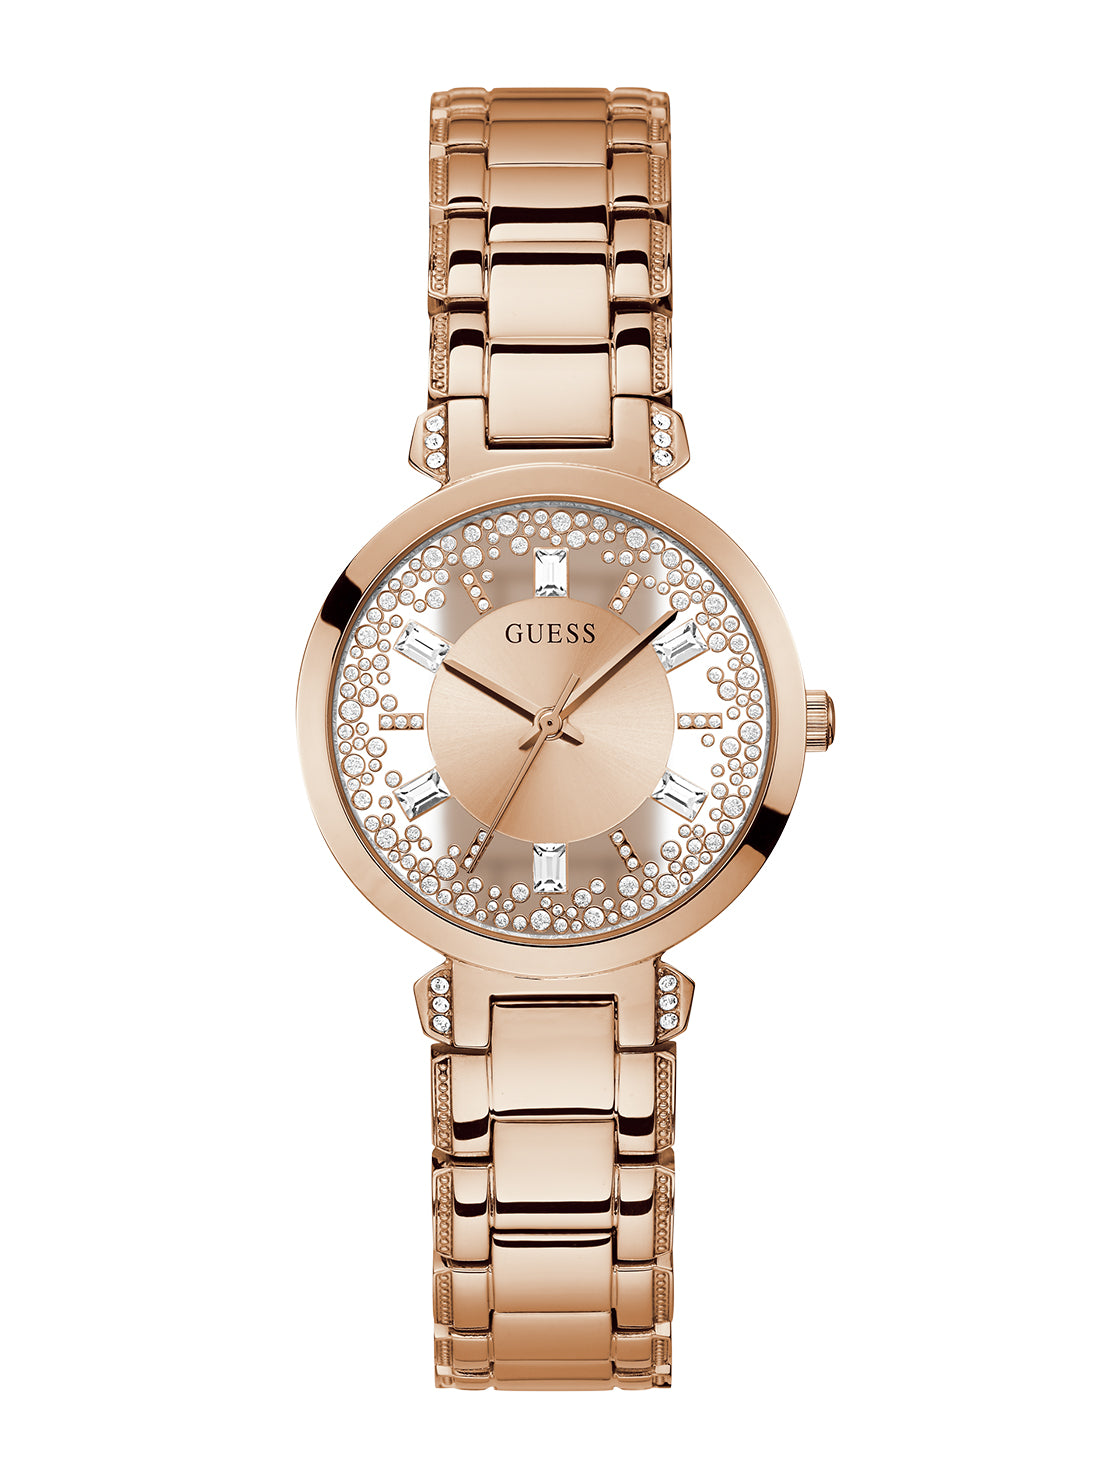 GUESS Women's Rose Gold Crystal Clear Glitz Watch GW0470L3 Front View